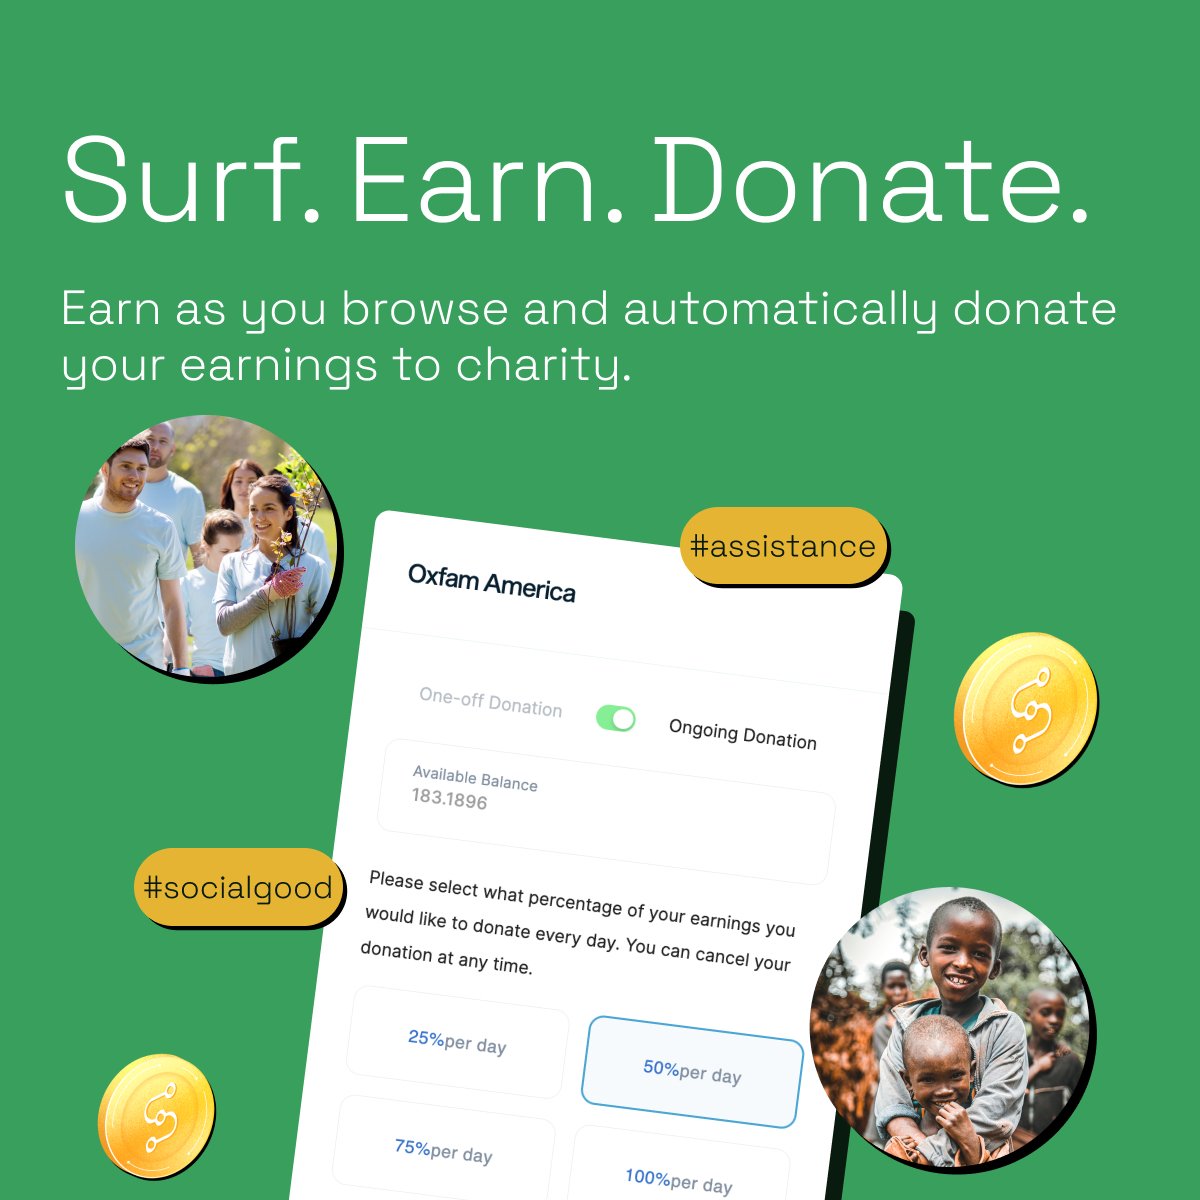 Set up ongoing donations with Swash's #DataforGood feature and do good on autopilot! 

Your contributions can make a big impact, so do your part and set up your first donation today 

swashapp.io/solutions/dona…